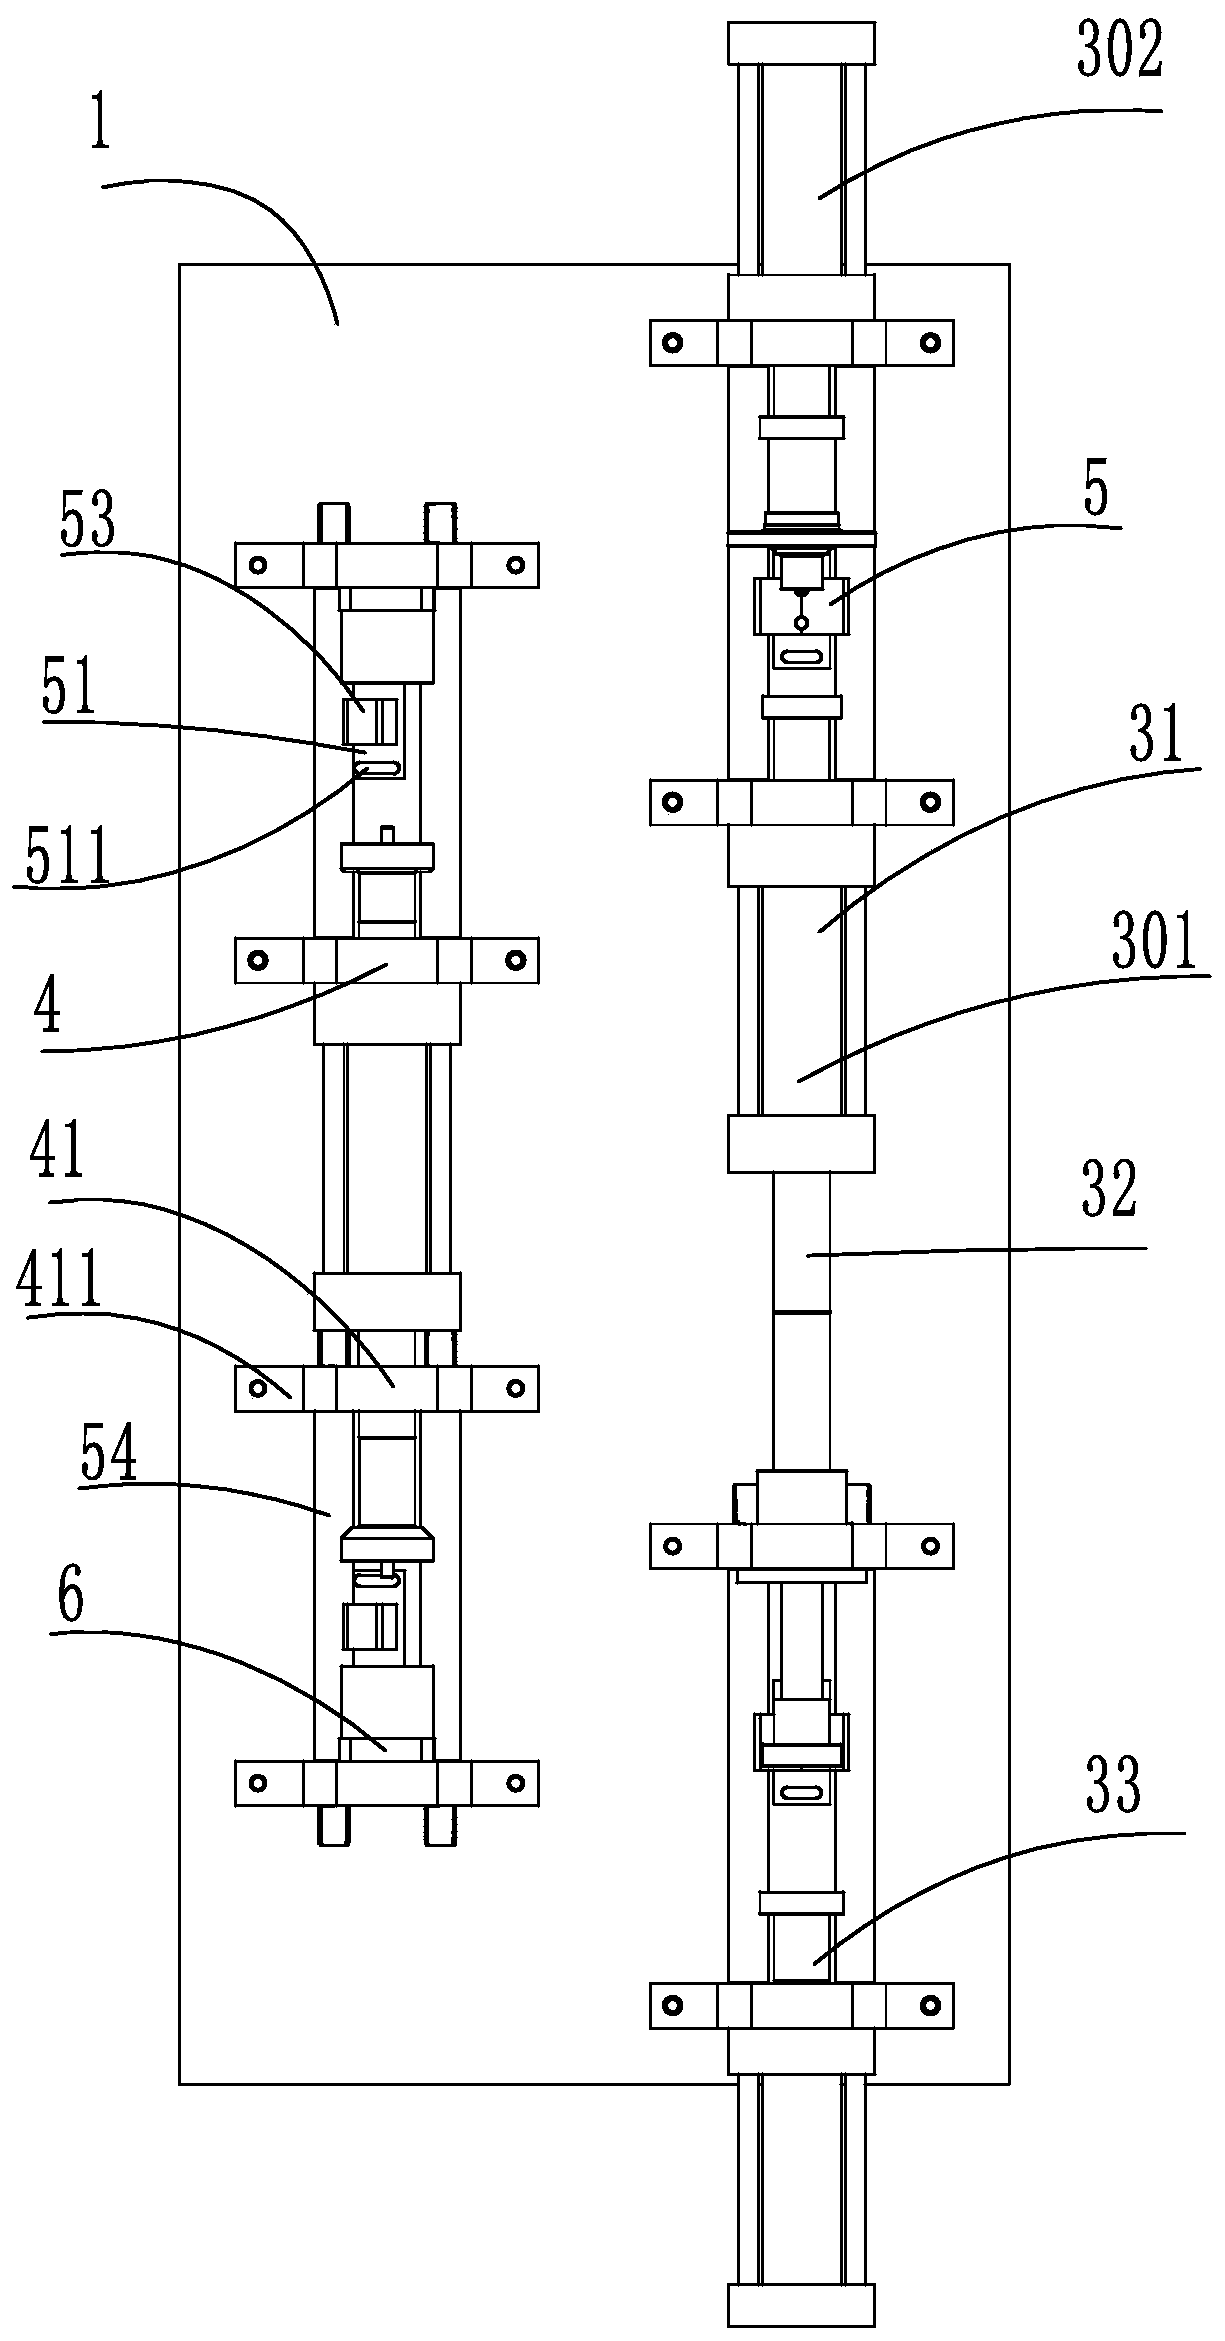 A high-efficiency press-fitting equipment for rear axle bearings